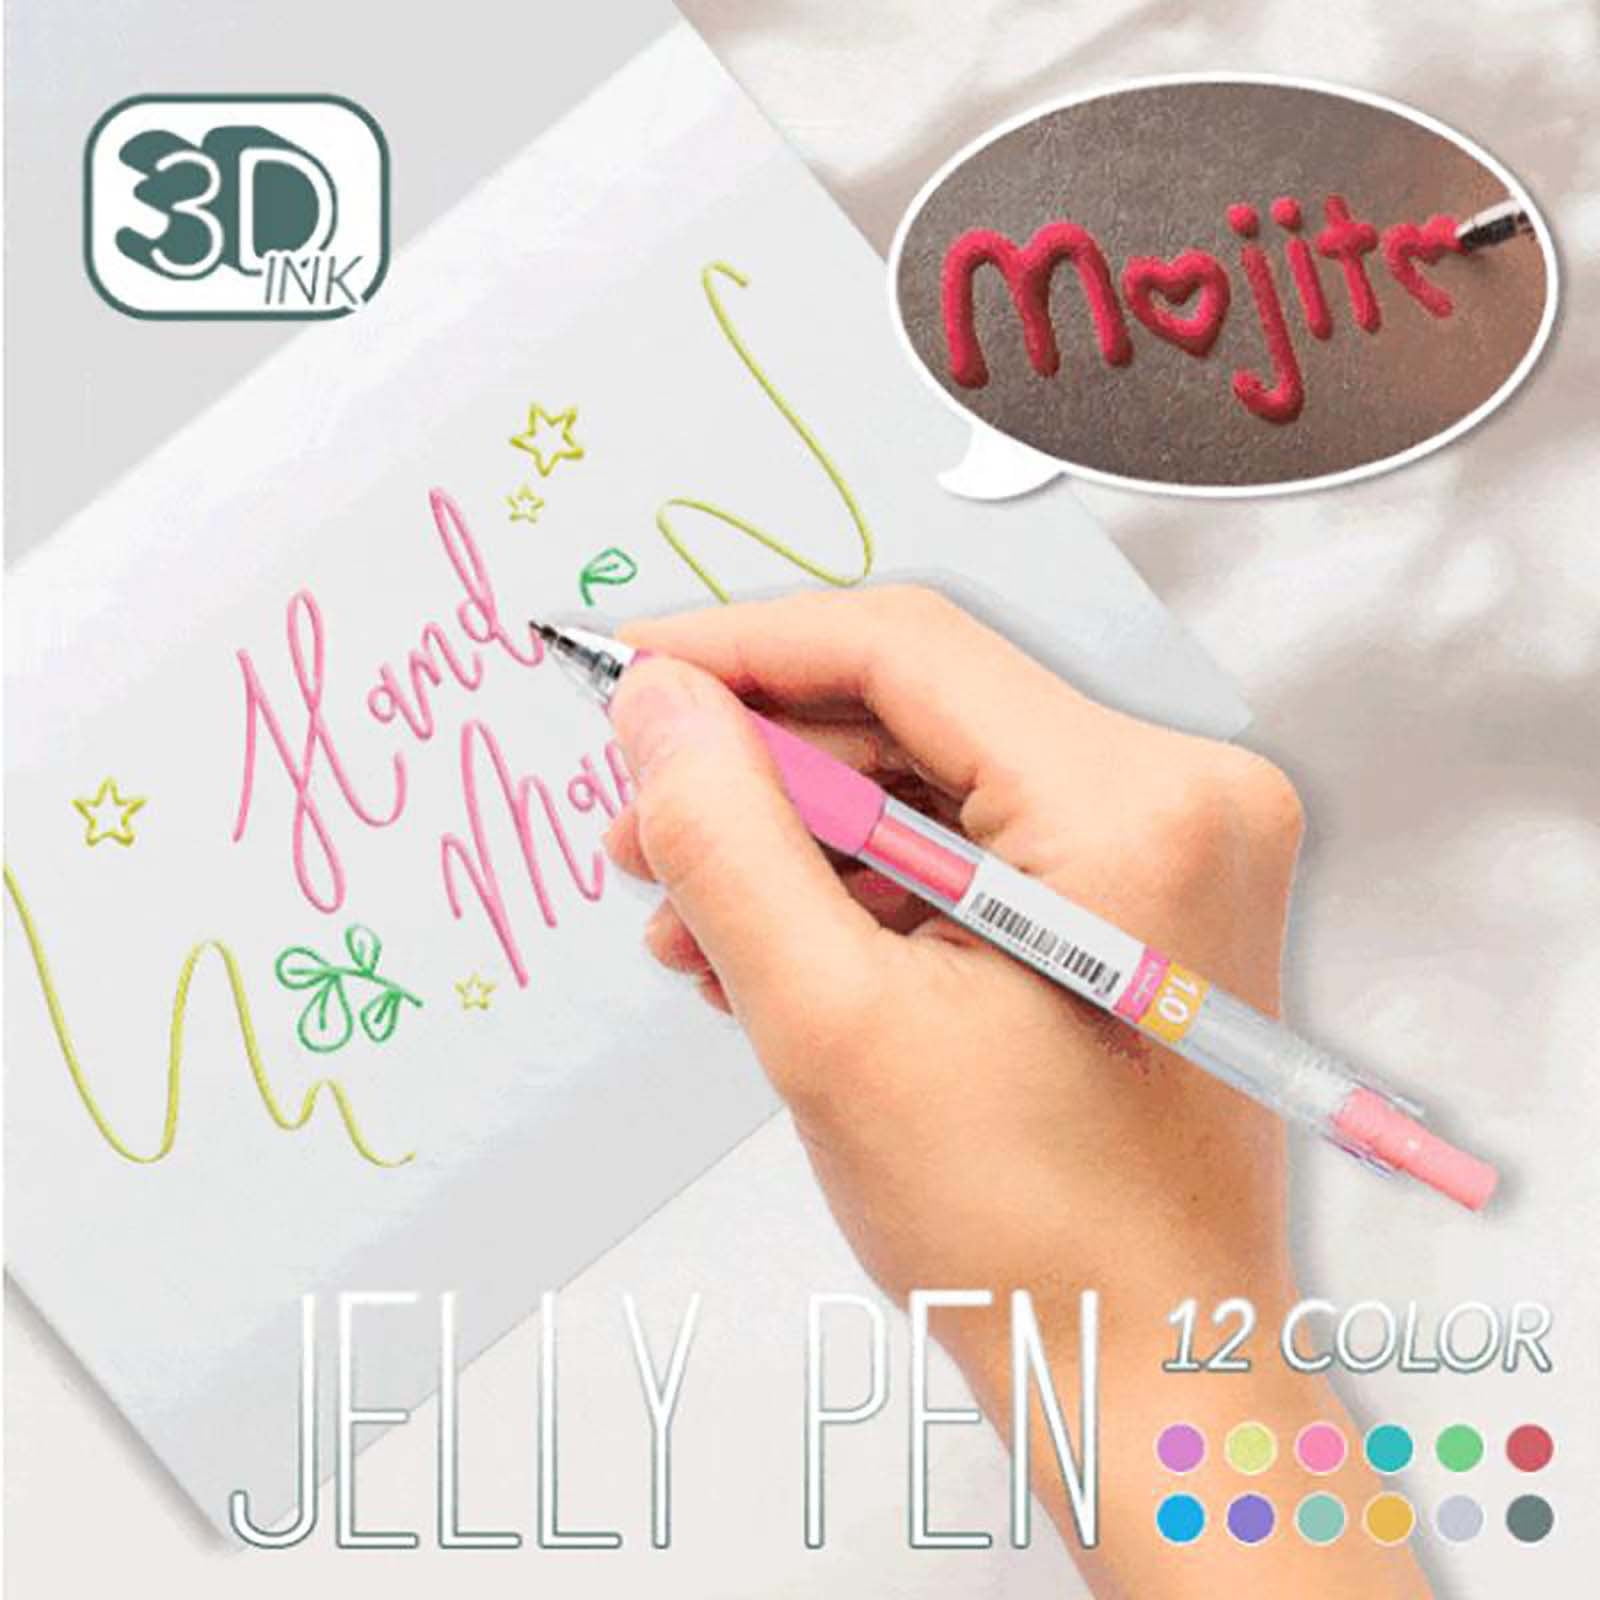 3D Jelly Pens, 8/12 Colors Candy Color Gel Ink Pens, Art Supplies Marker,  Handwriting Pens, Ink Pens for Writing Notes